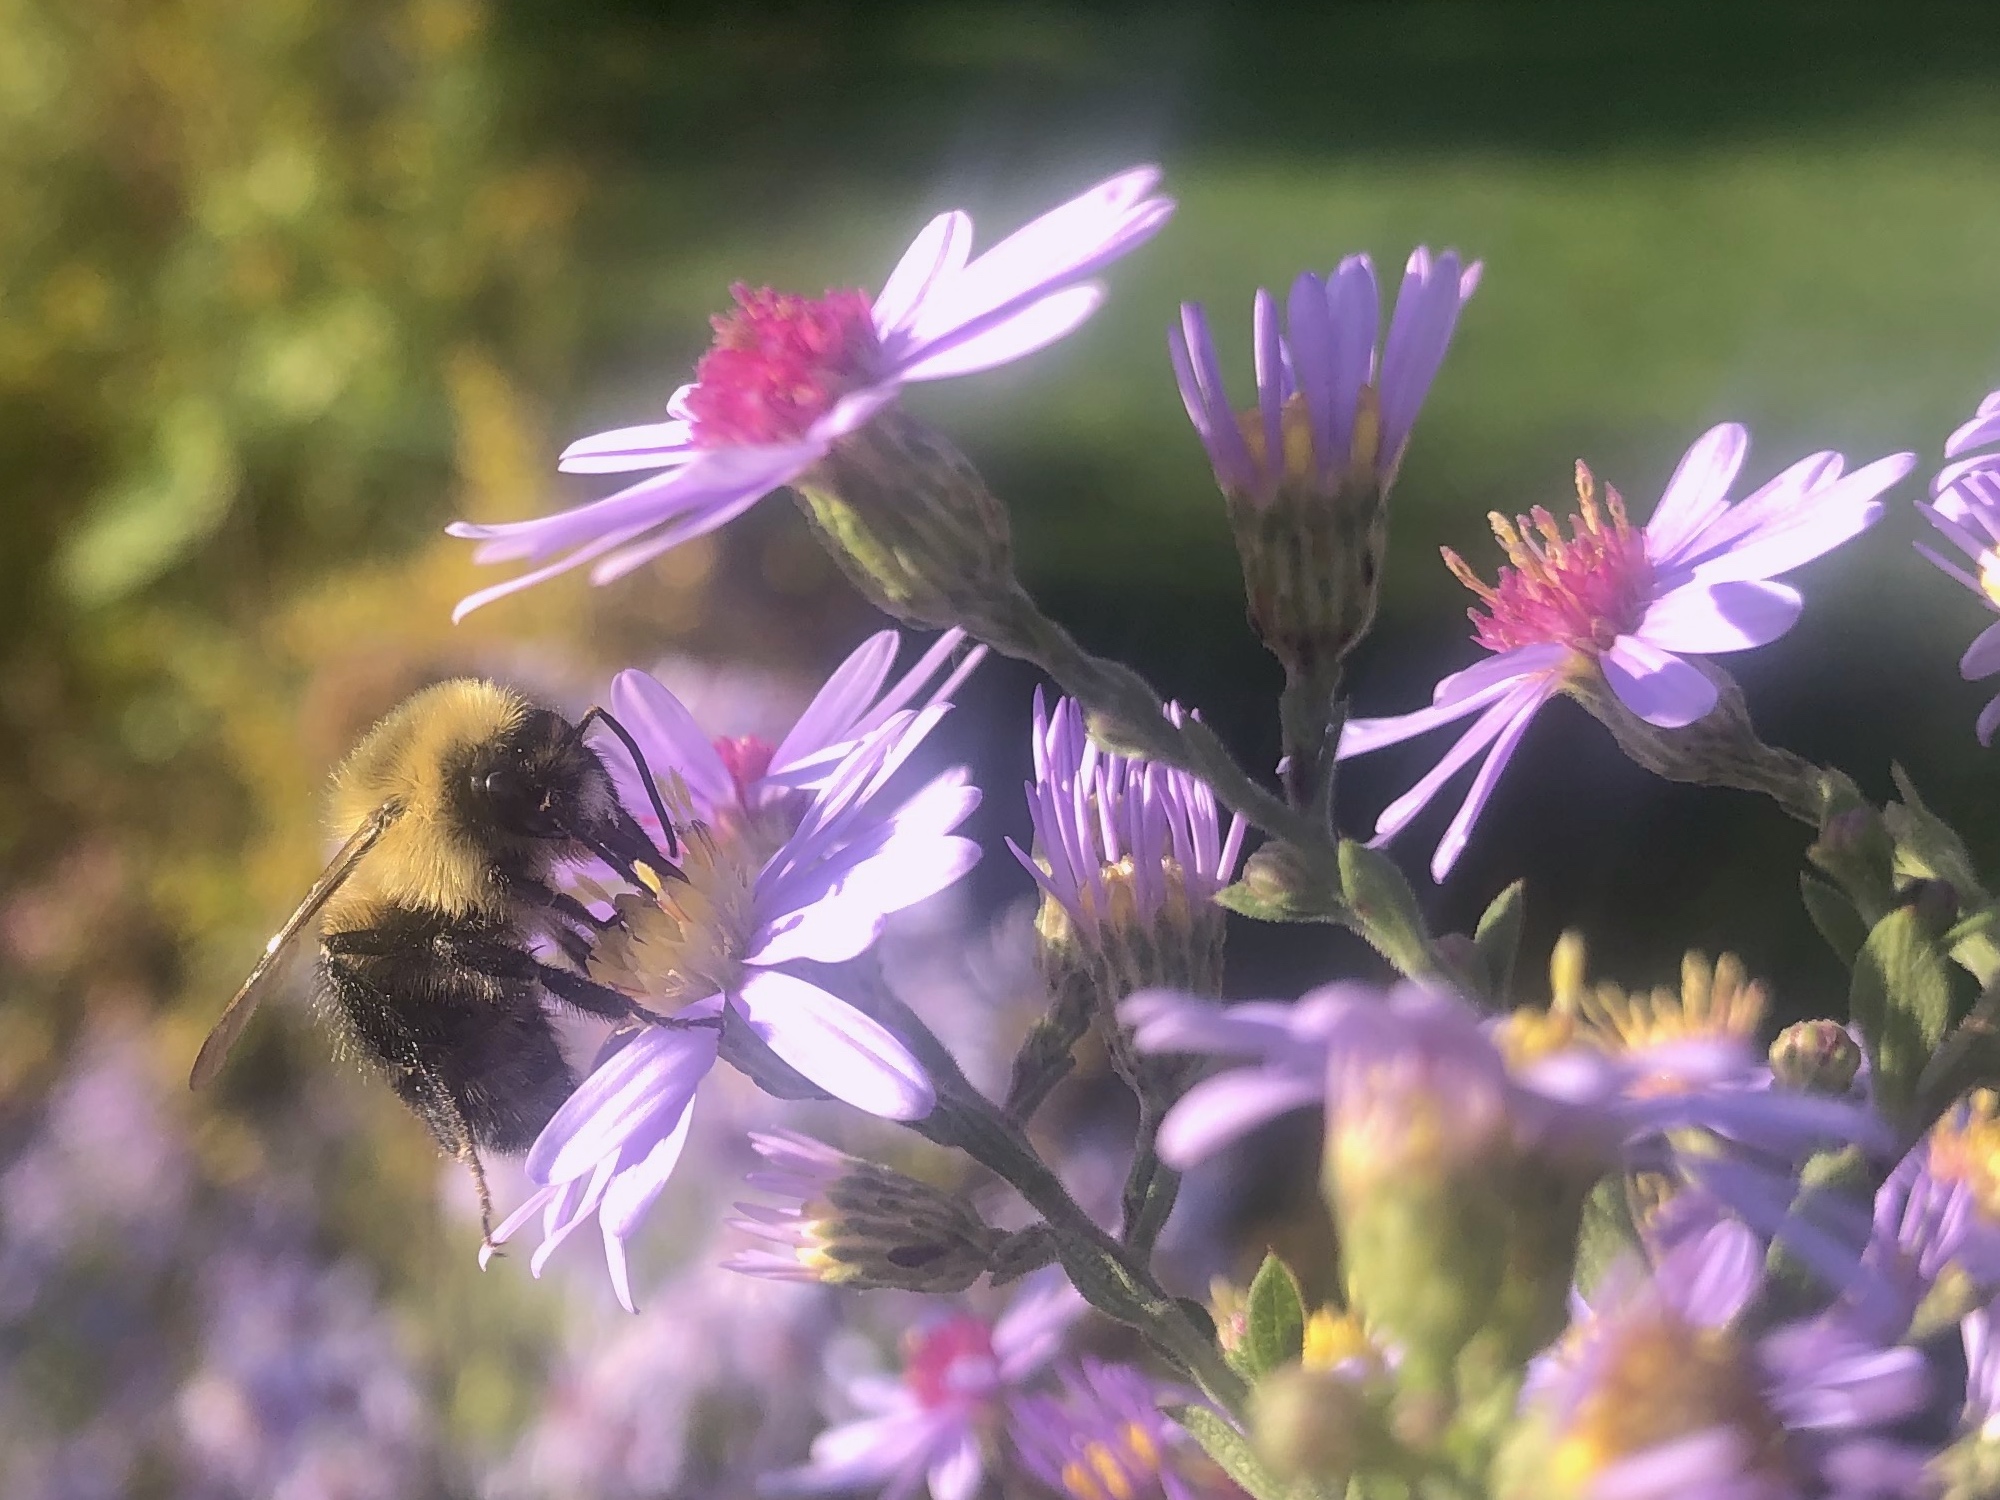 Bumblebee on Aster on September 30, 2020.